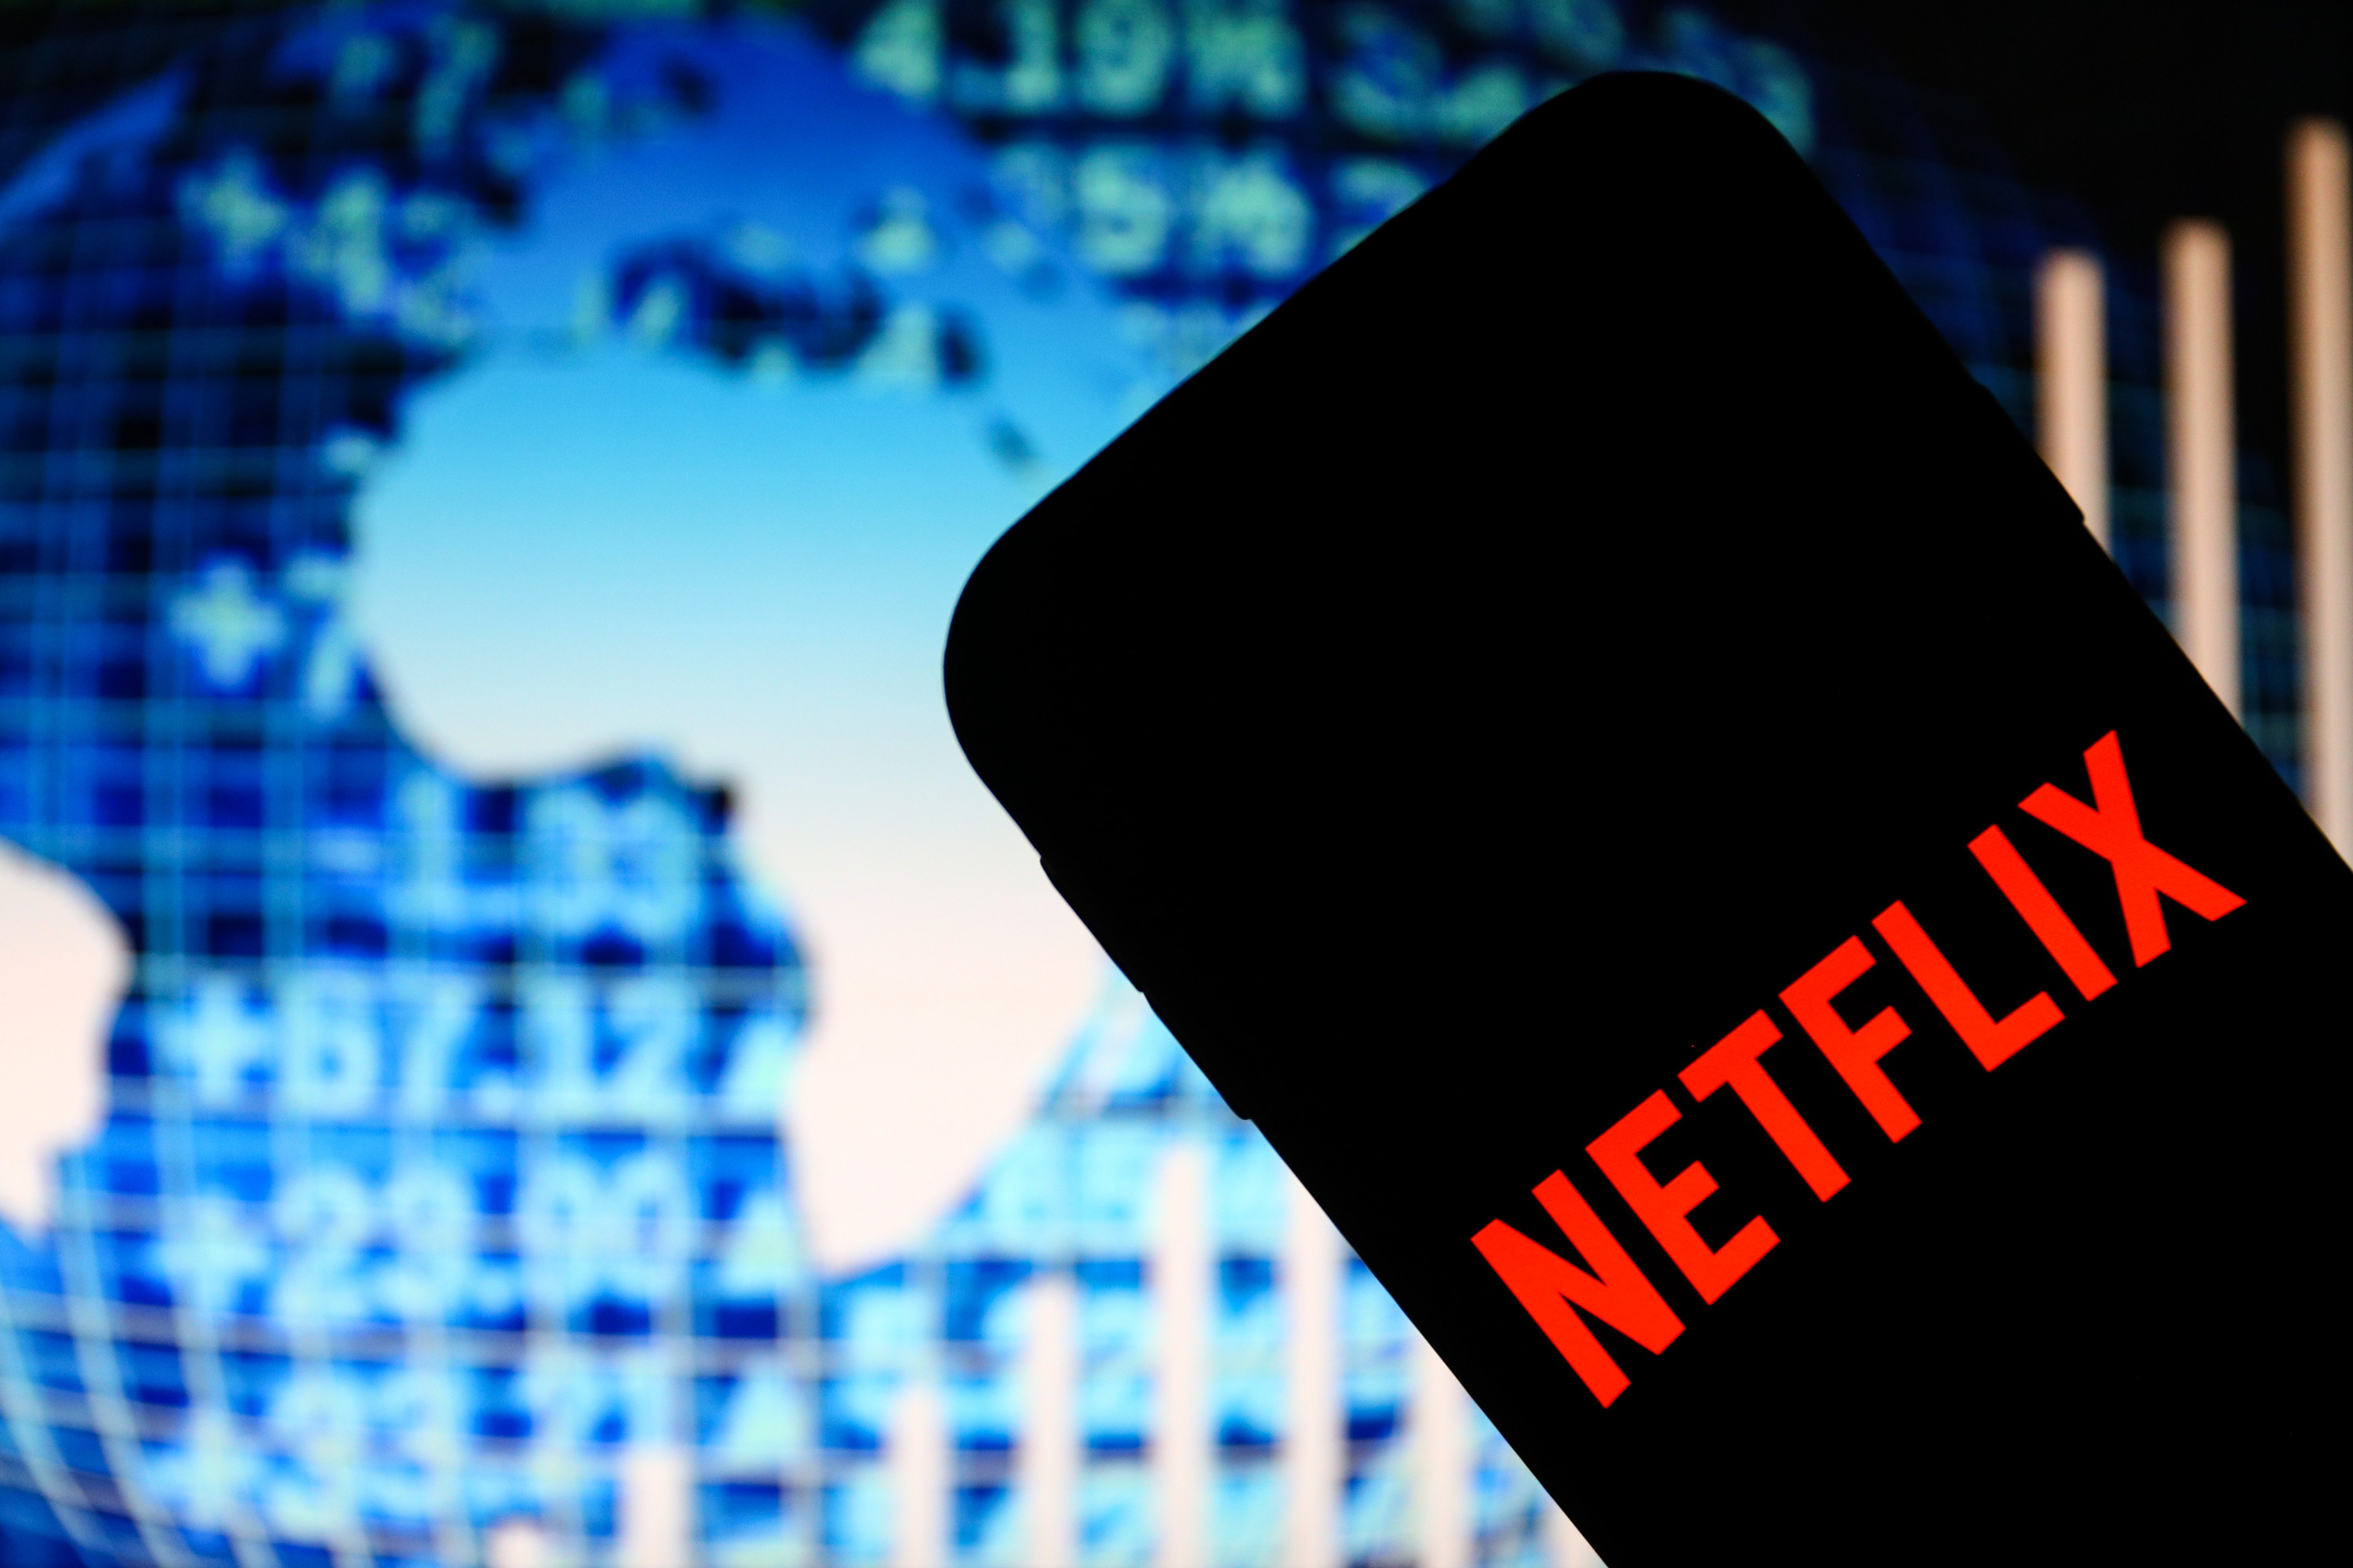 The Netflix logo is displayed on a smartphone with blue world data stats in the background